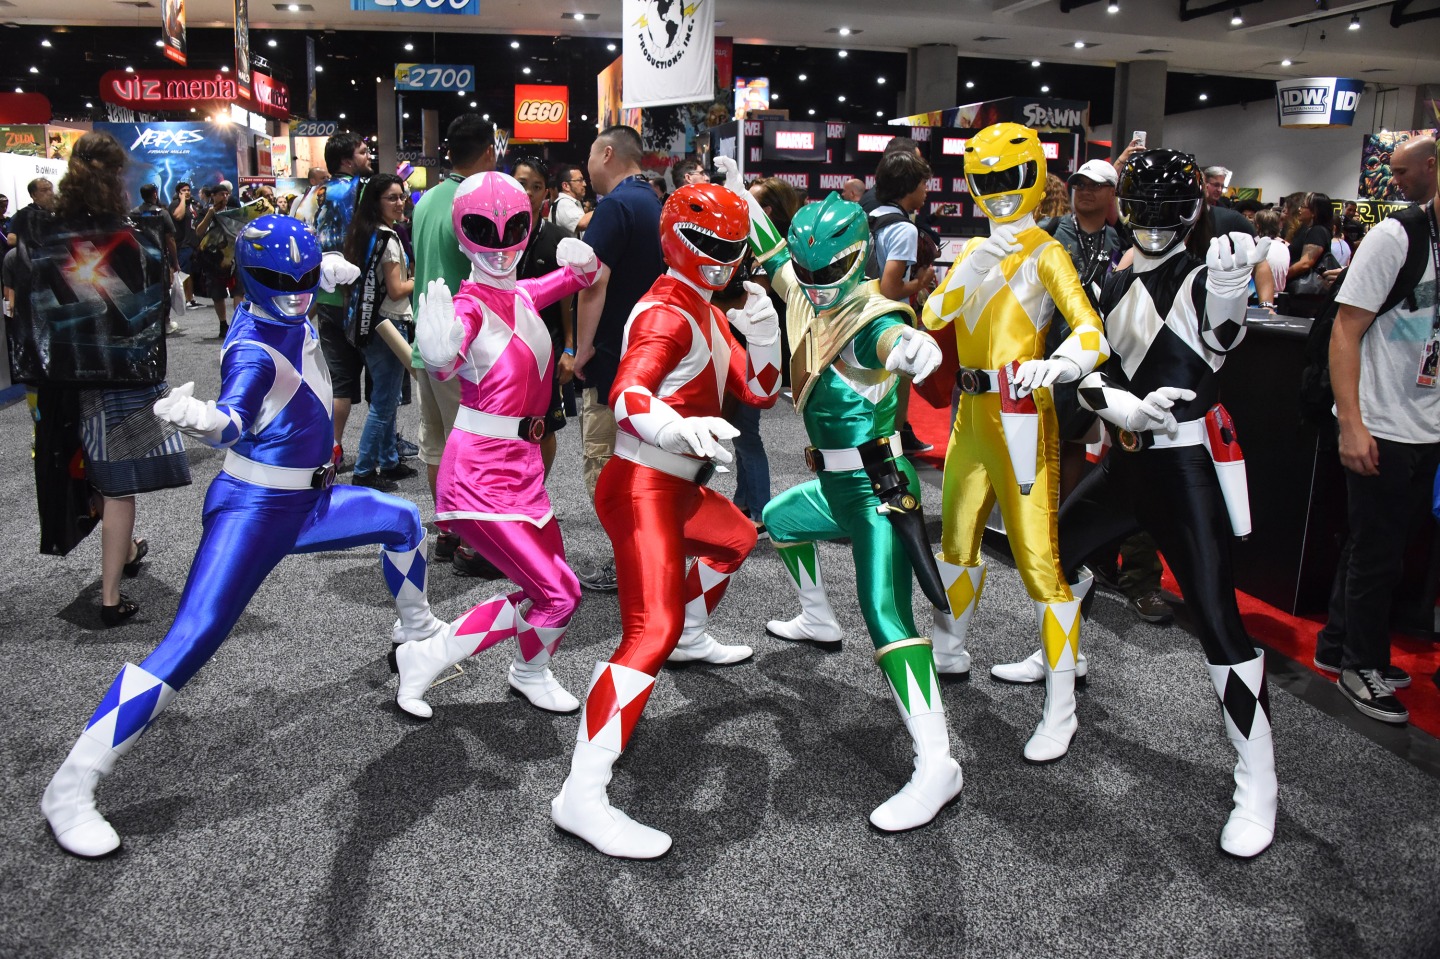 The Power Rangers displayed the Millennial taste for cooperation—and conformity.